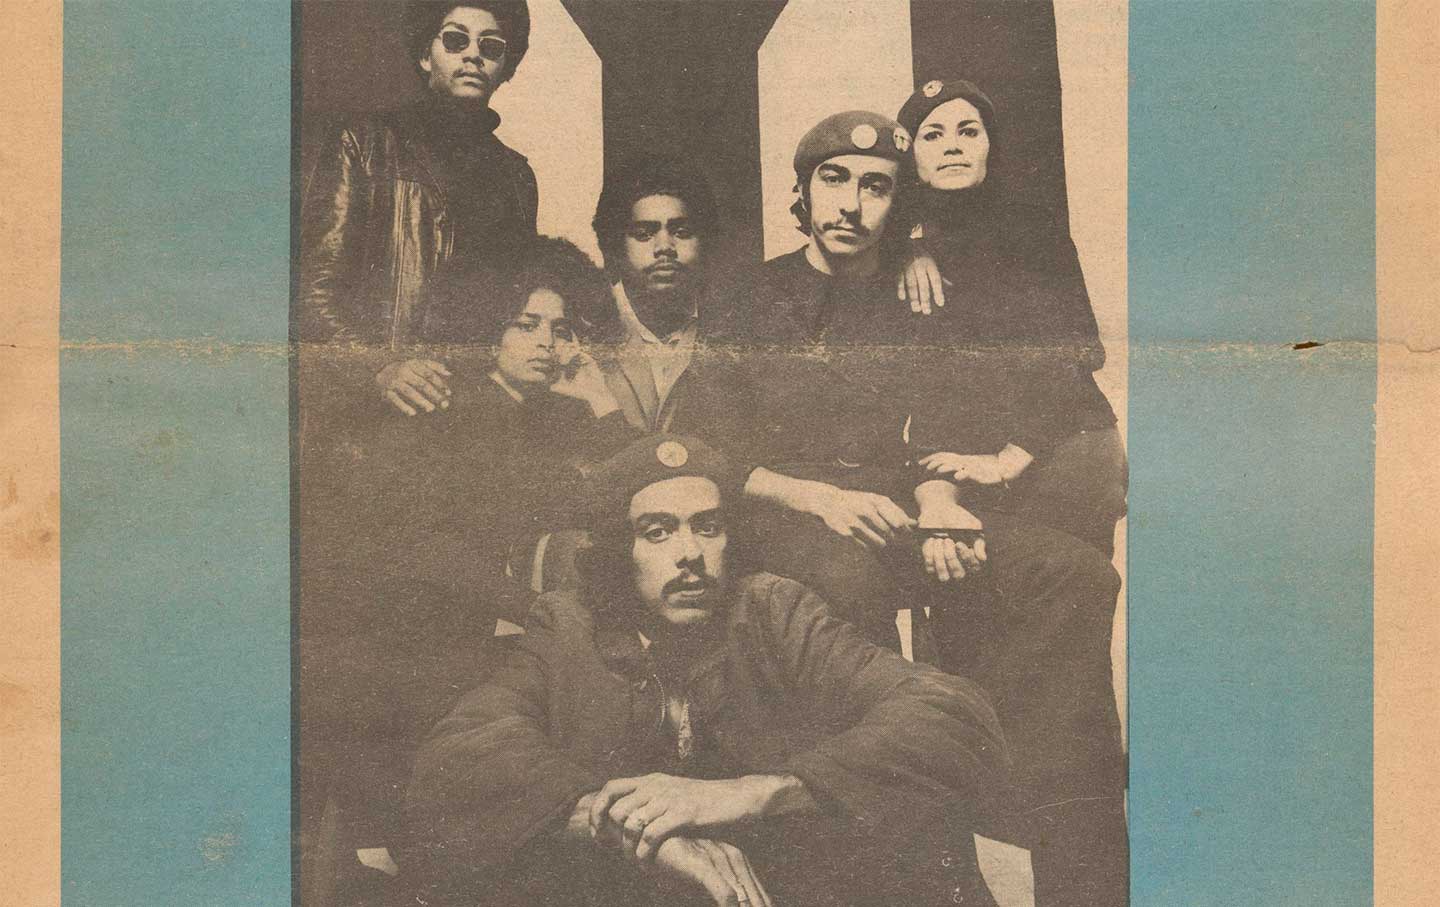 Celebrating the Young Lords—Amid Revolution in Puerto Rico